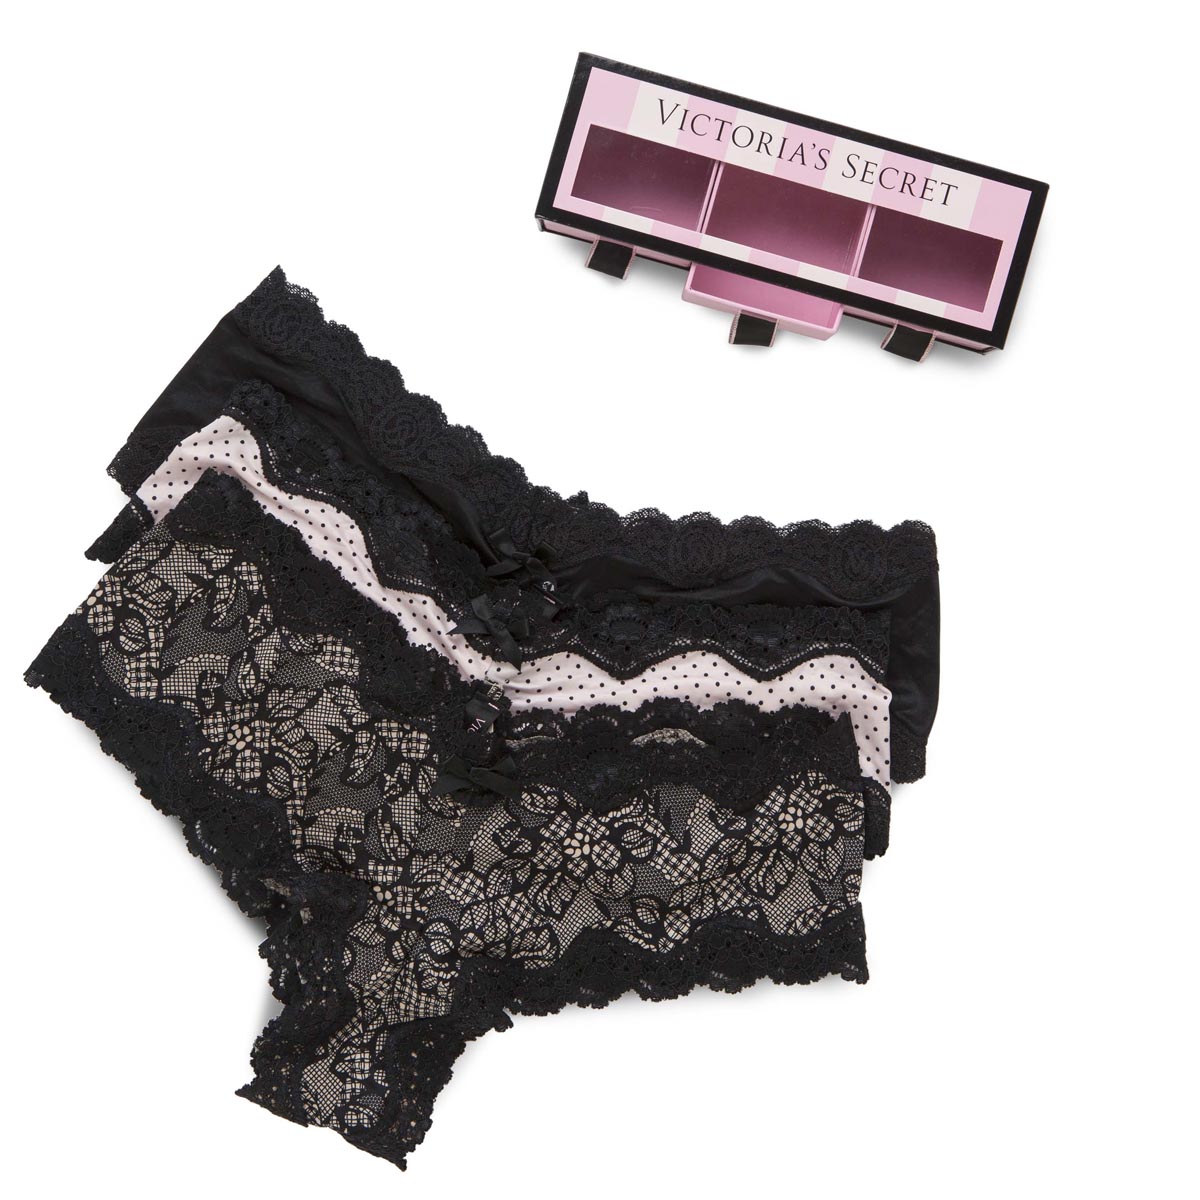 Victoria's Secret Cheeky Panties No Show Box of 3 - Large - Worth